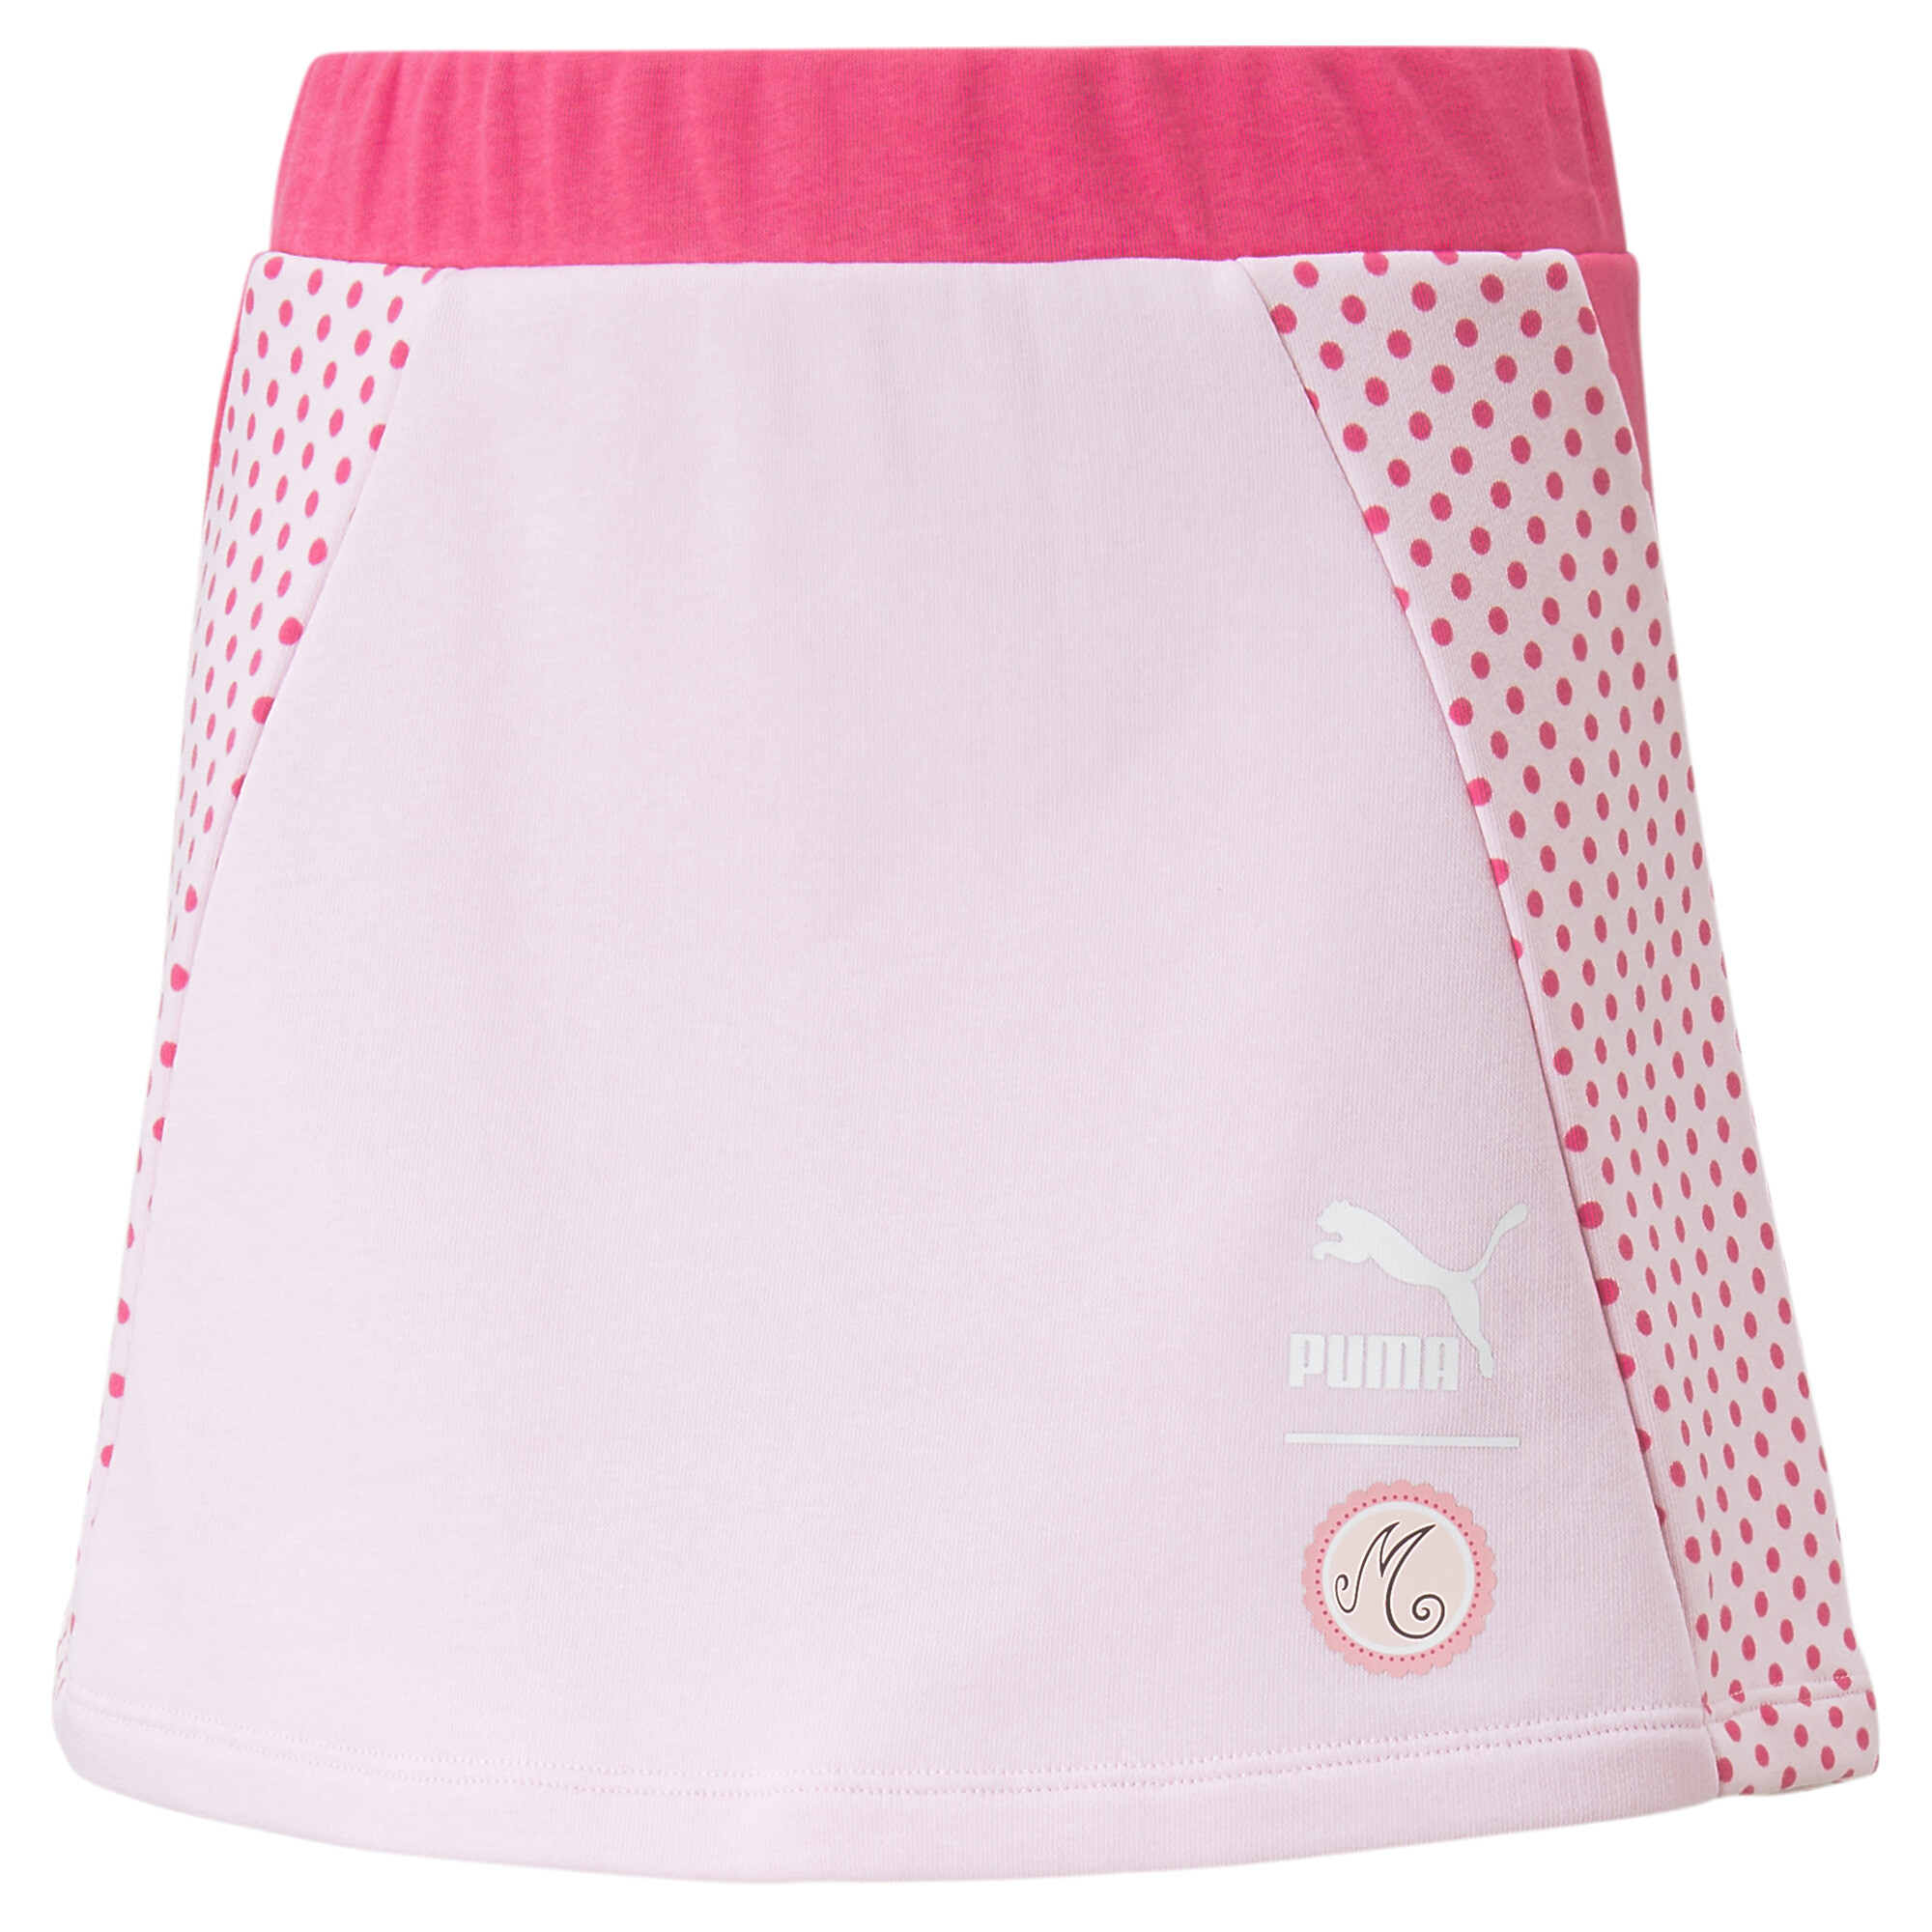 PUMA X MIRACULOUS Skirt In Pink, Size 7-8 Youth